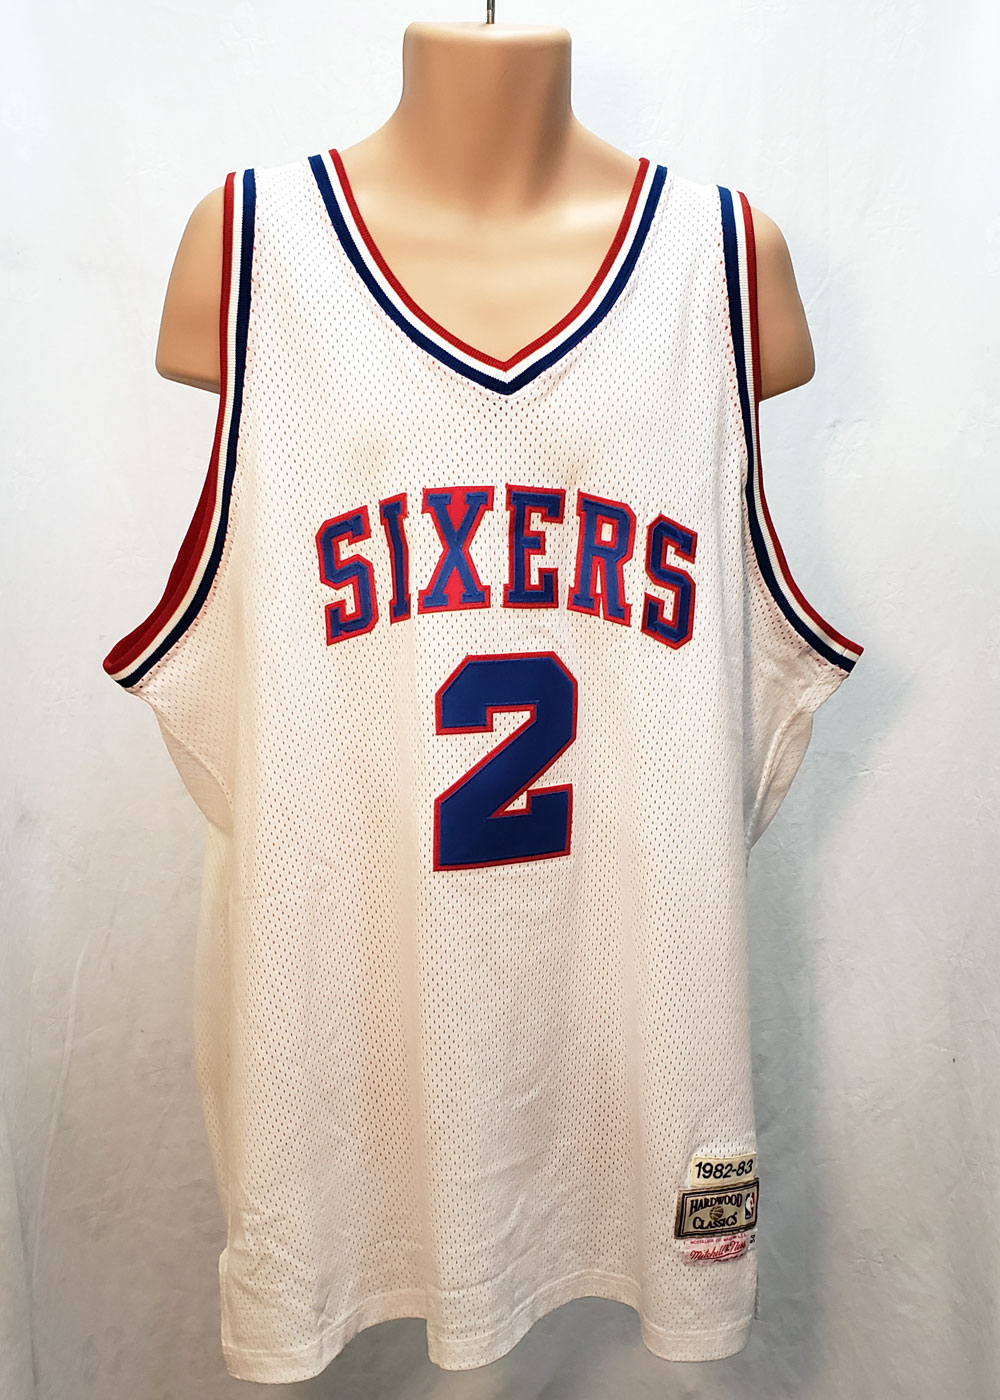 moses malone jersey products for sale